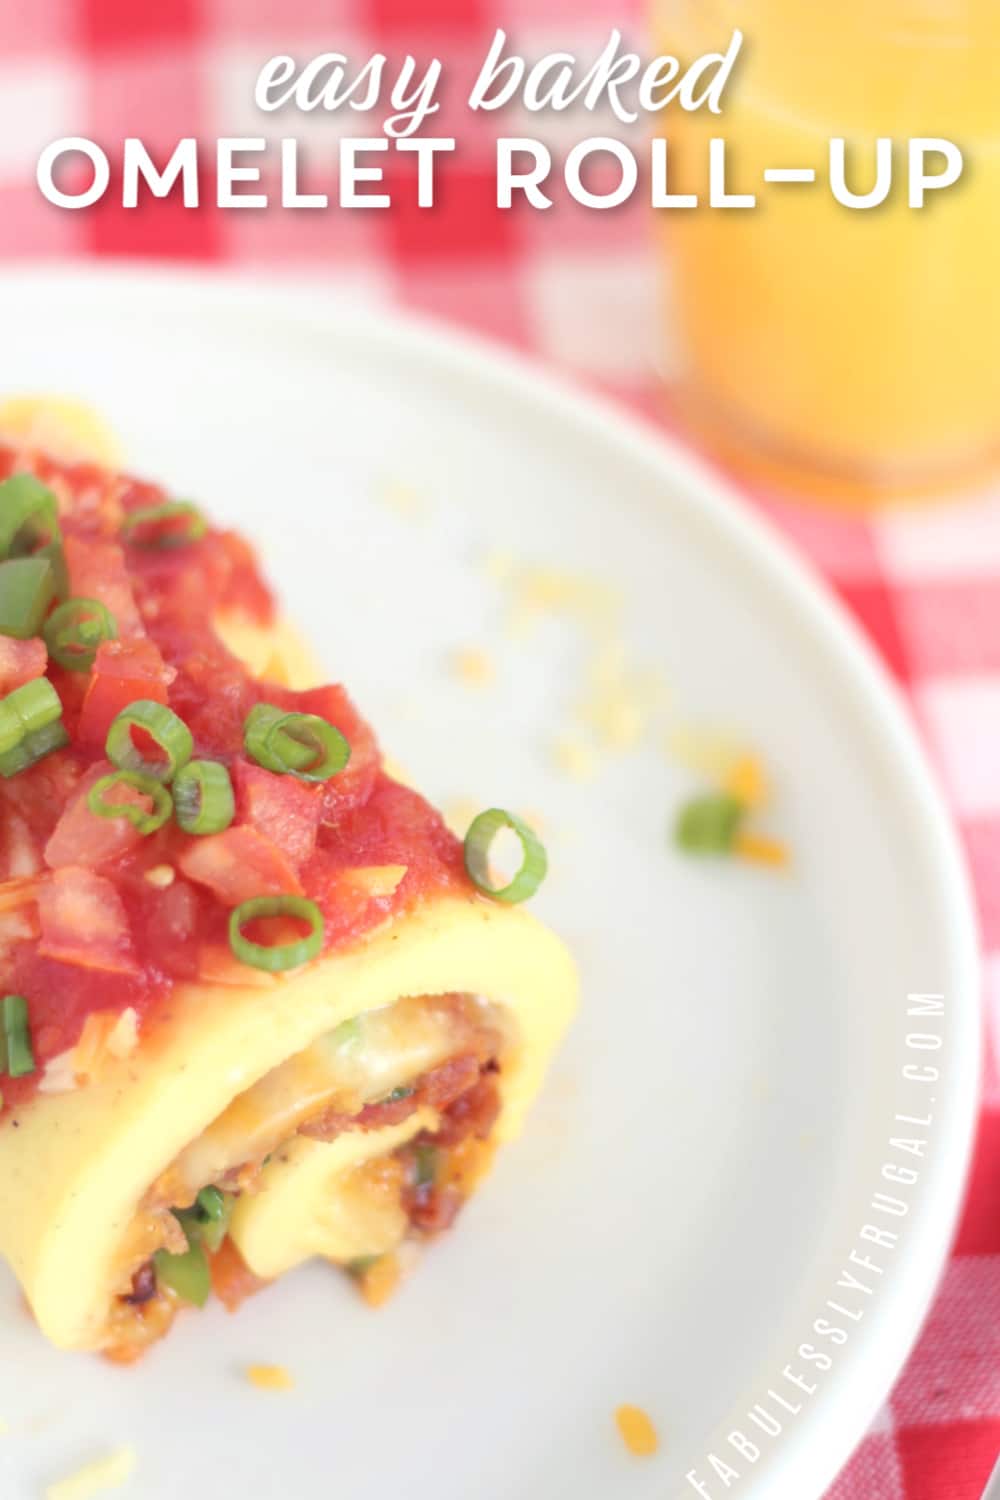 Baked omelet roll up recipe